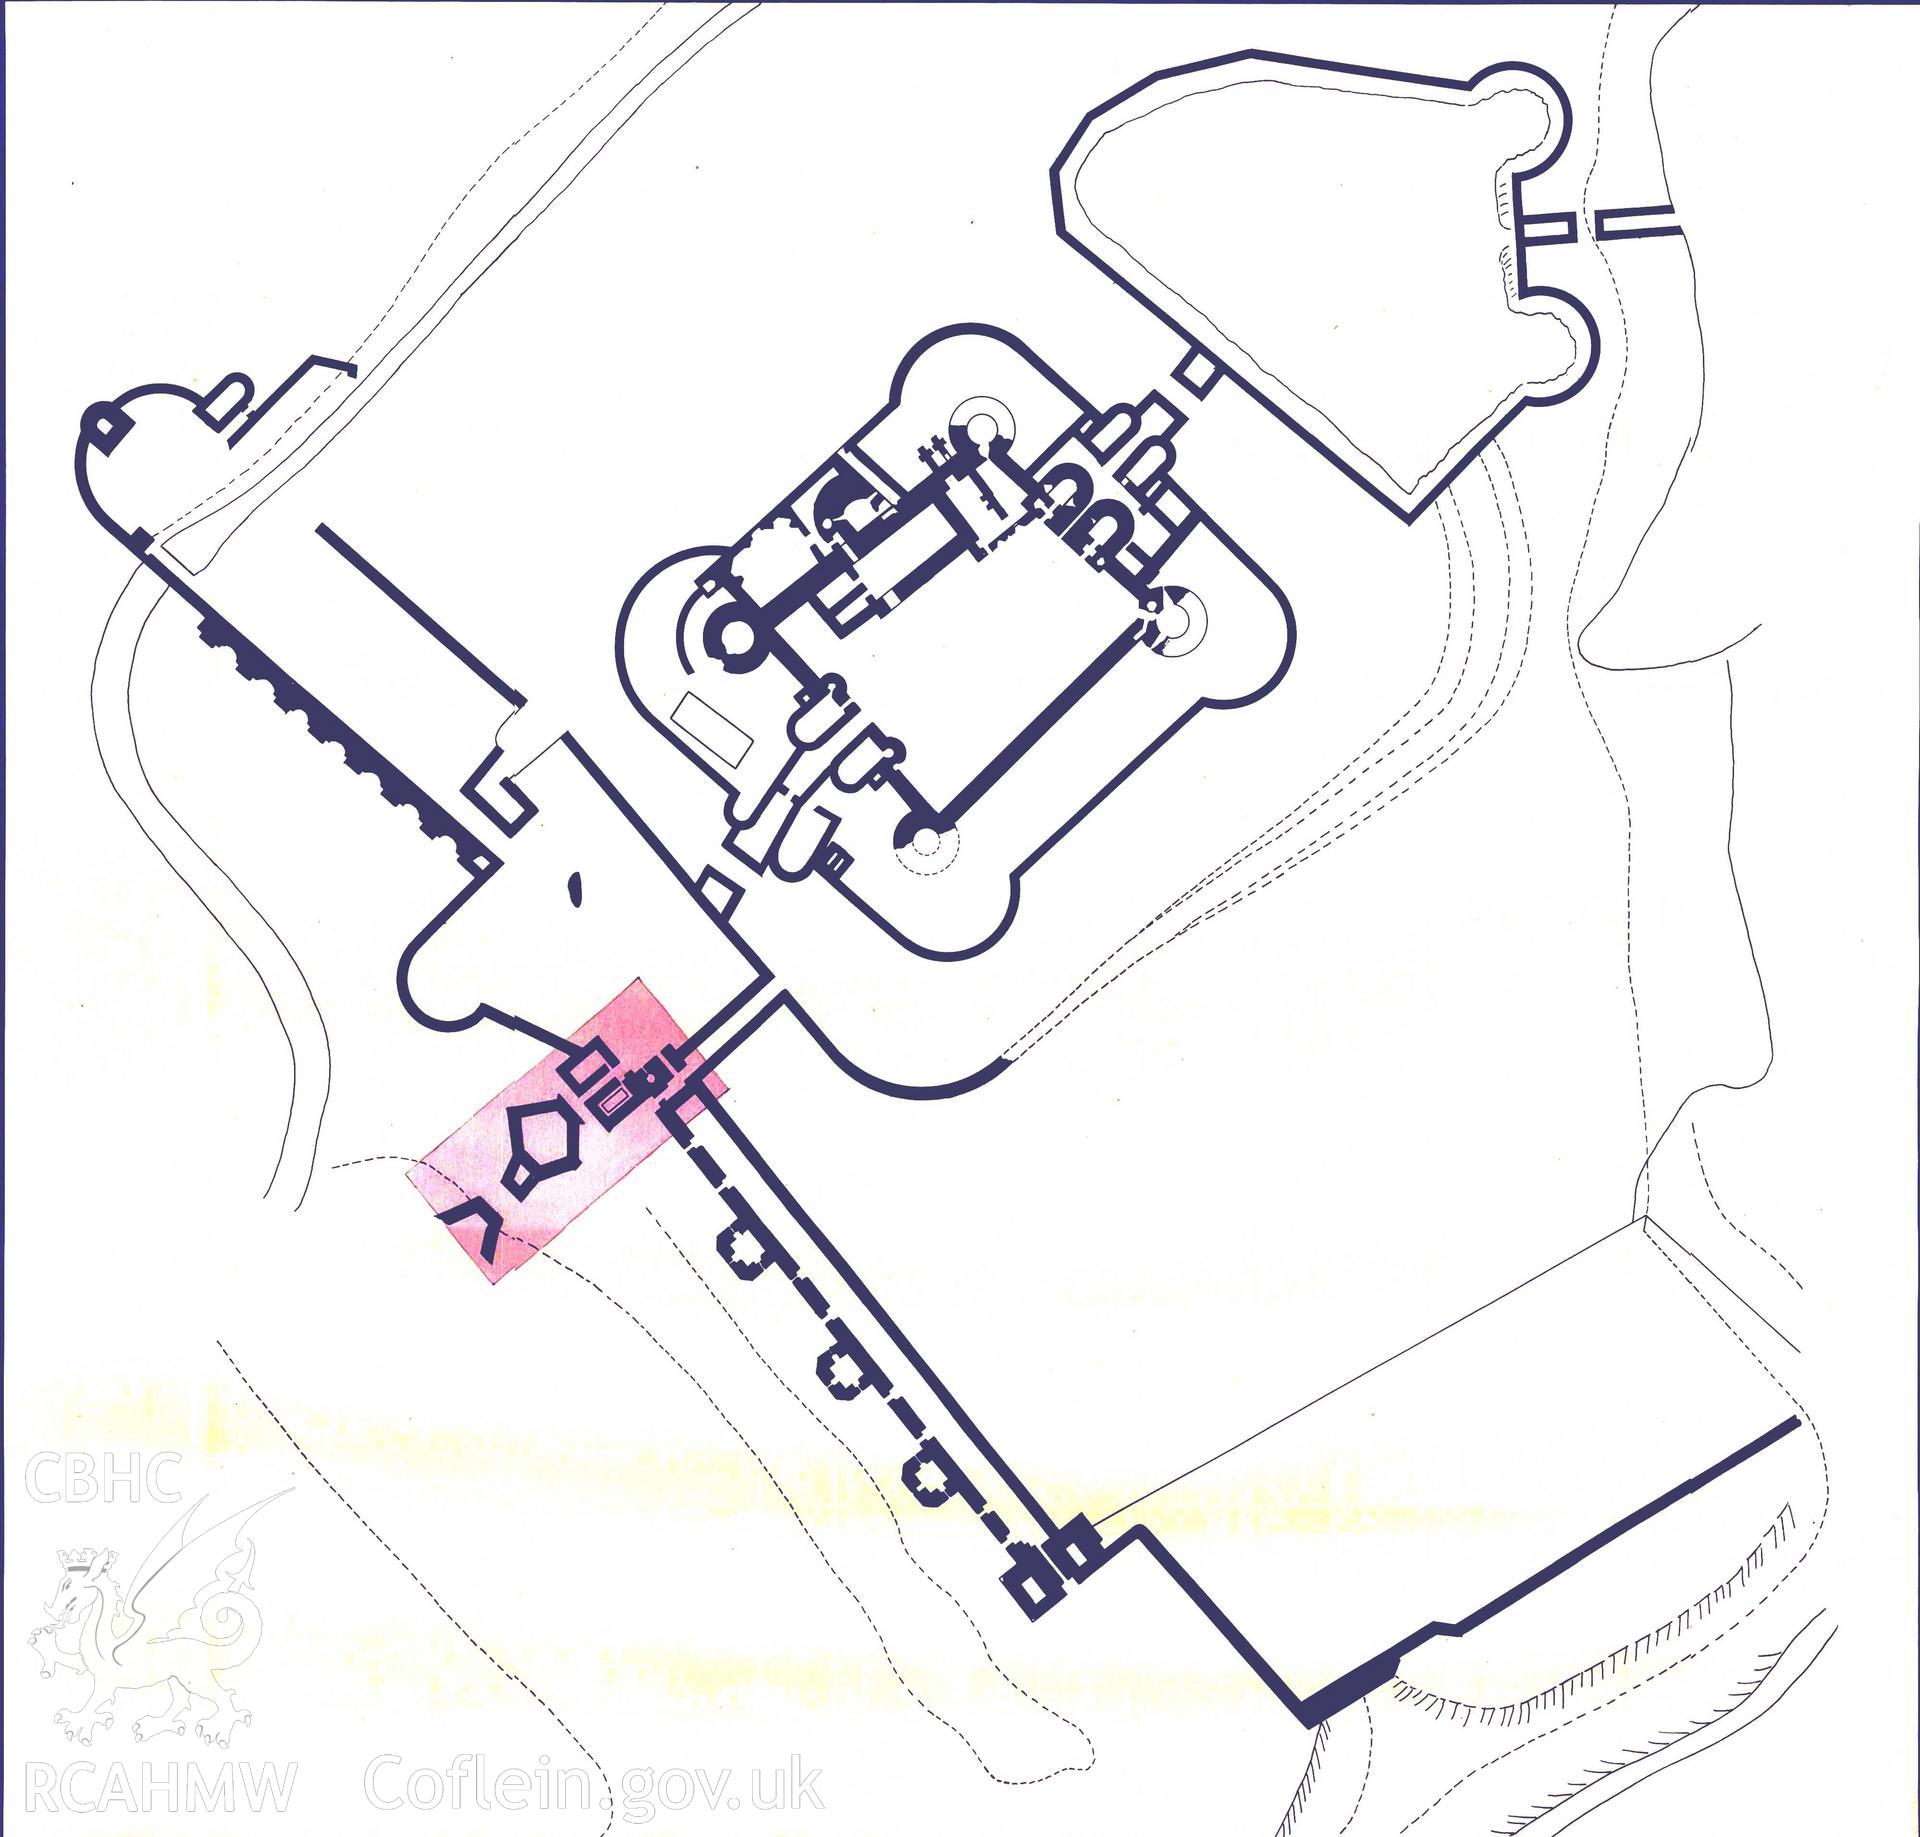 Digital copy of Cadw guardianship monument drawing of Caerphilly Castle. Castle Plan showing Grand Gateway. Cadw Ref. No:714B/381. Scale 1:96.